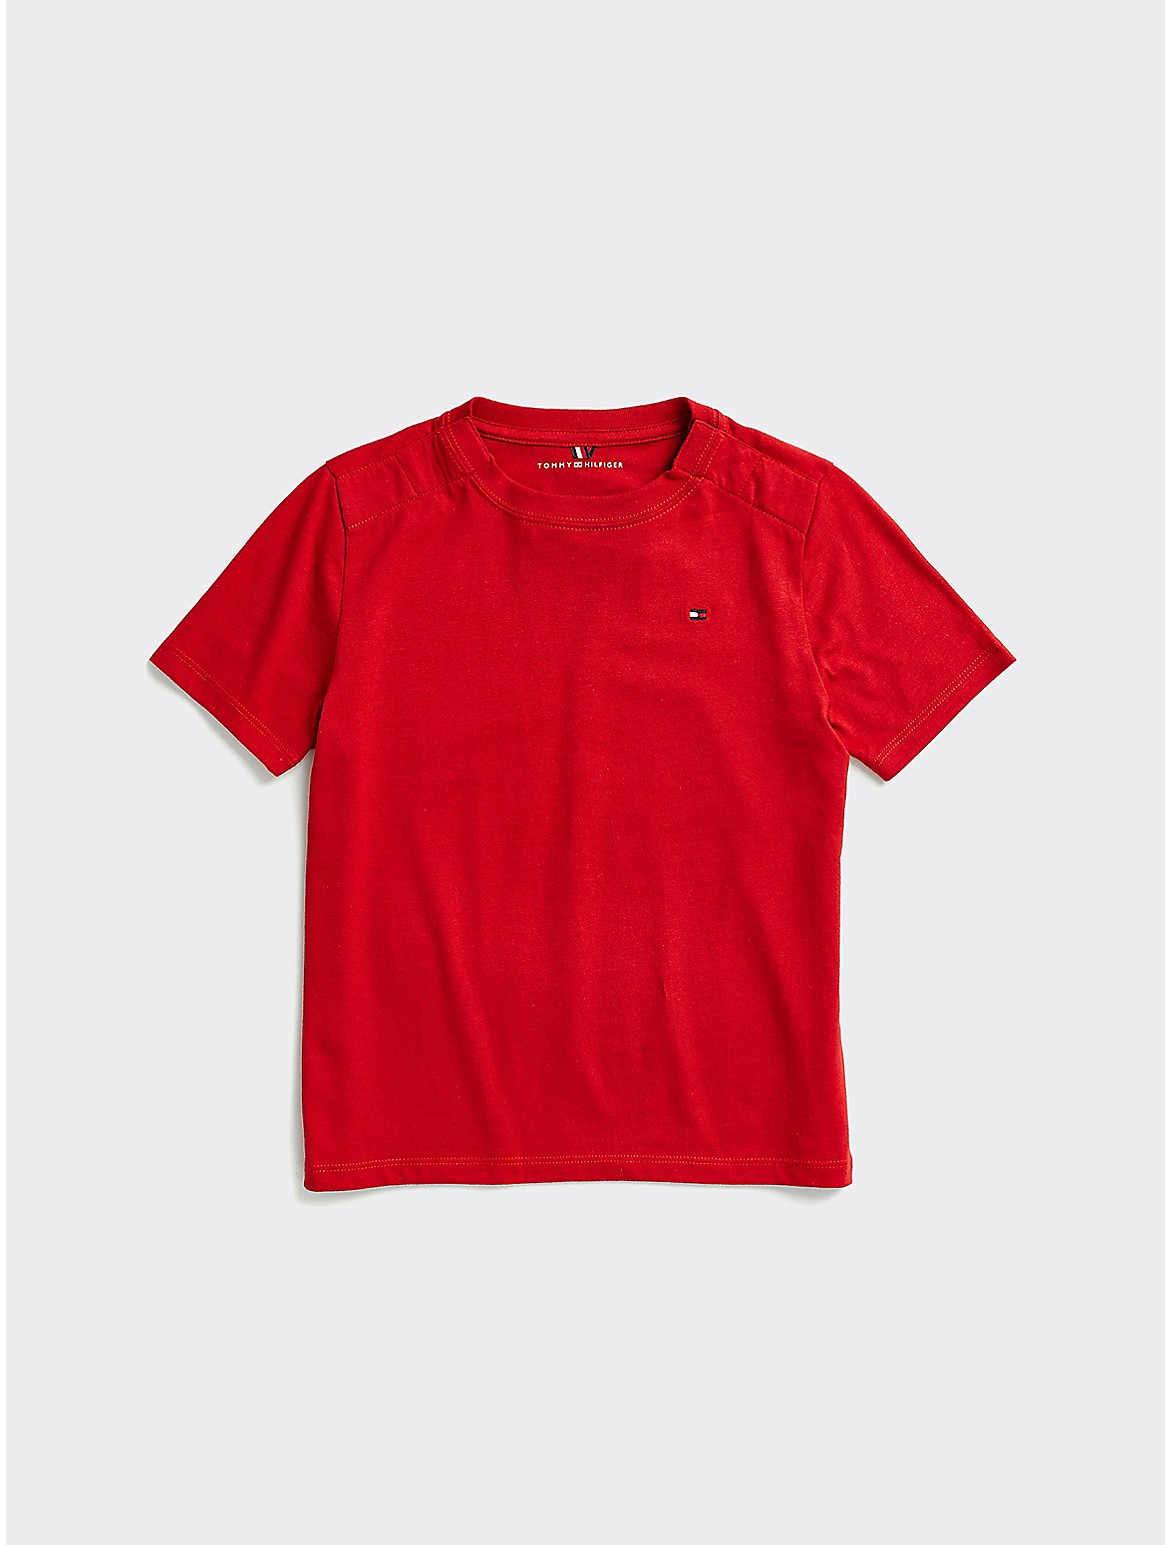 Tommy Hilfiger Boys' Classic T-Shirt - Red - XS